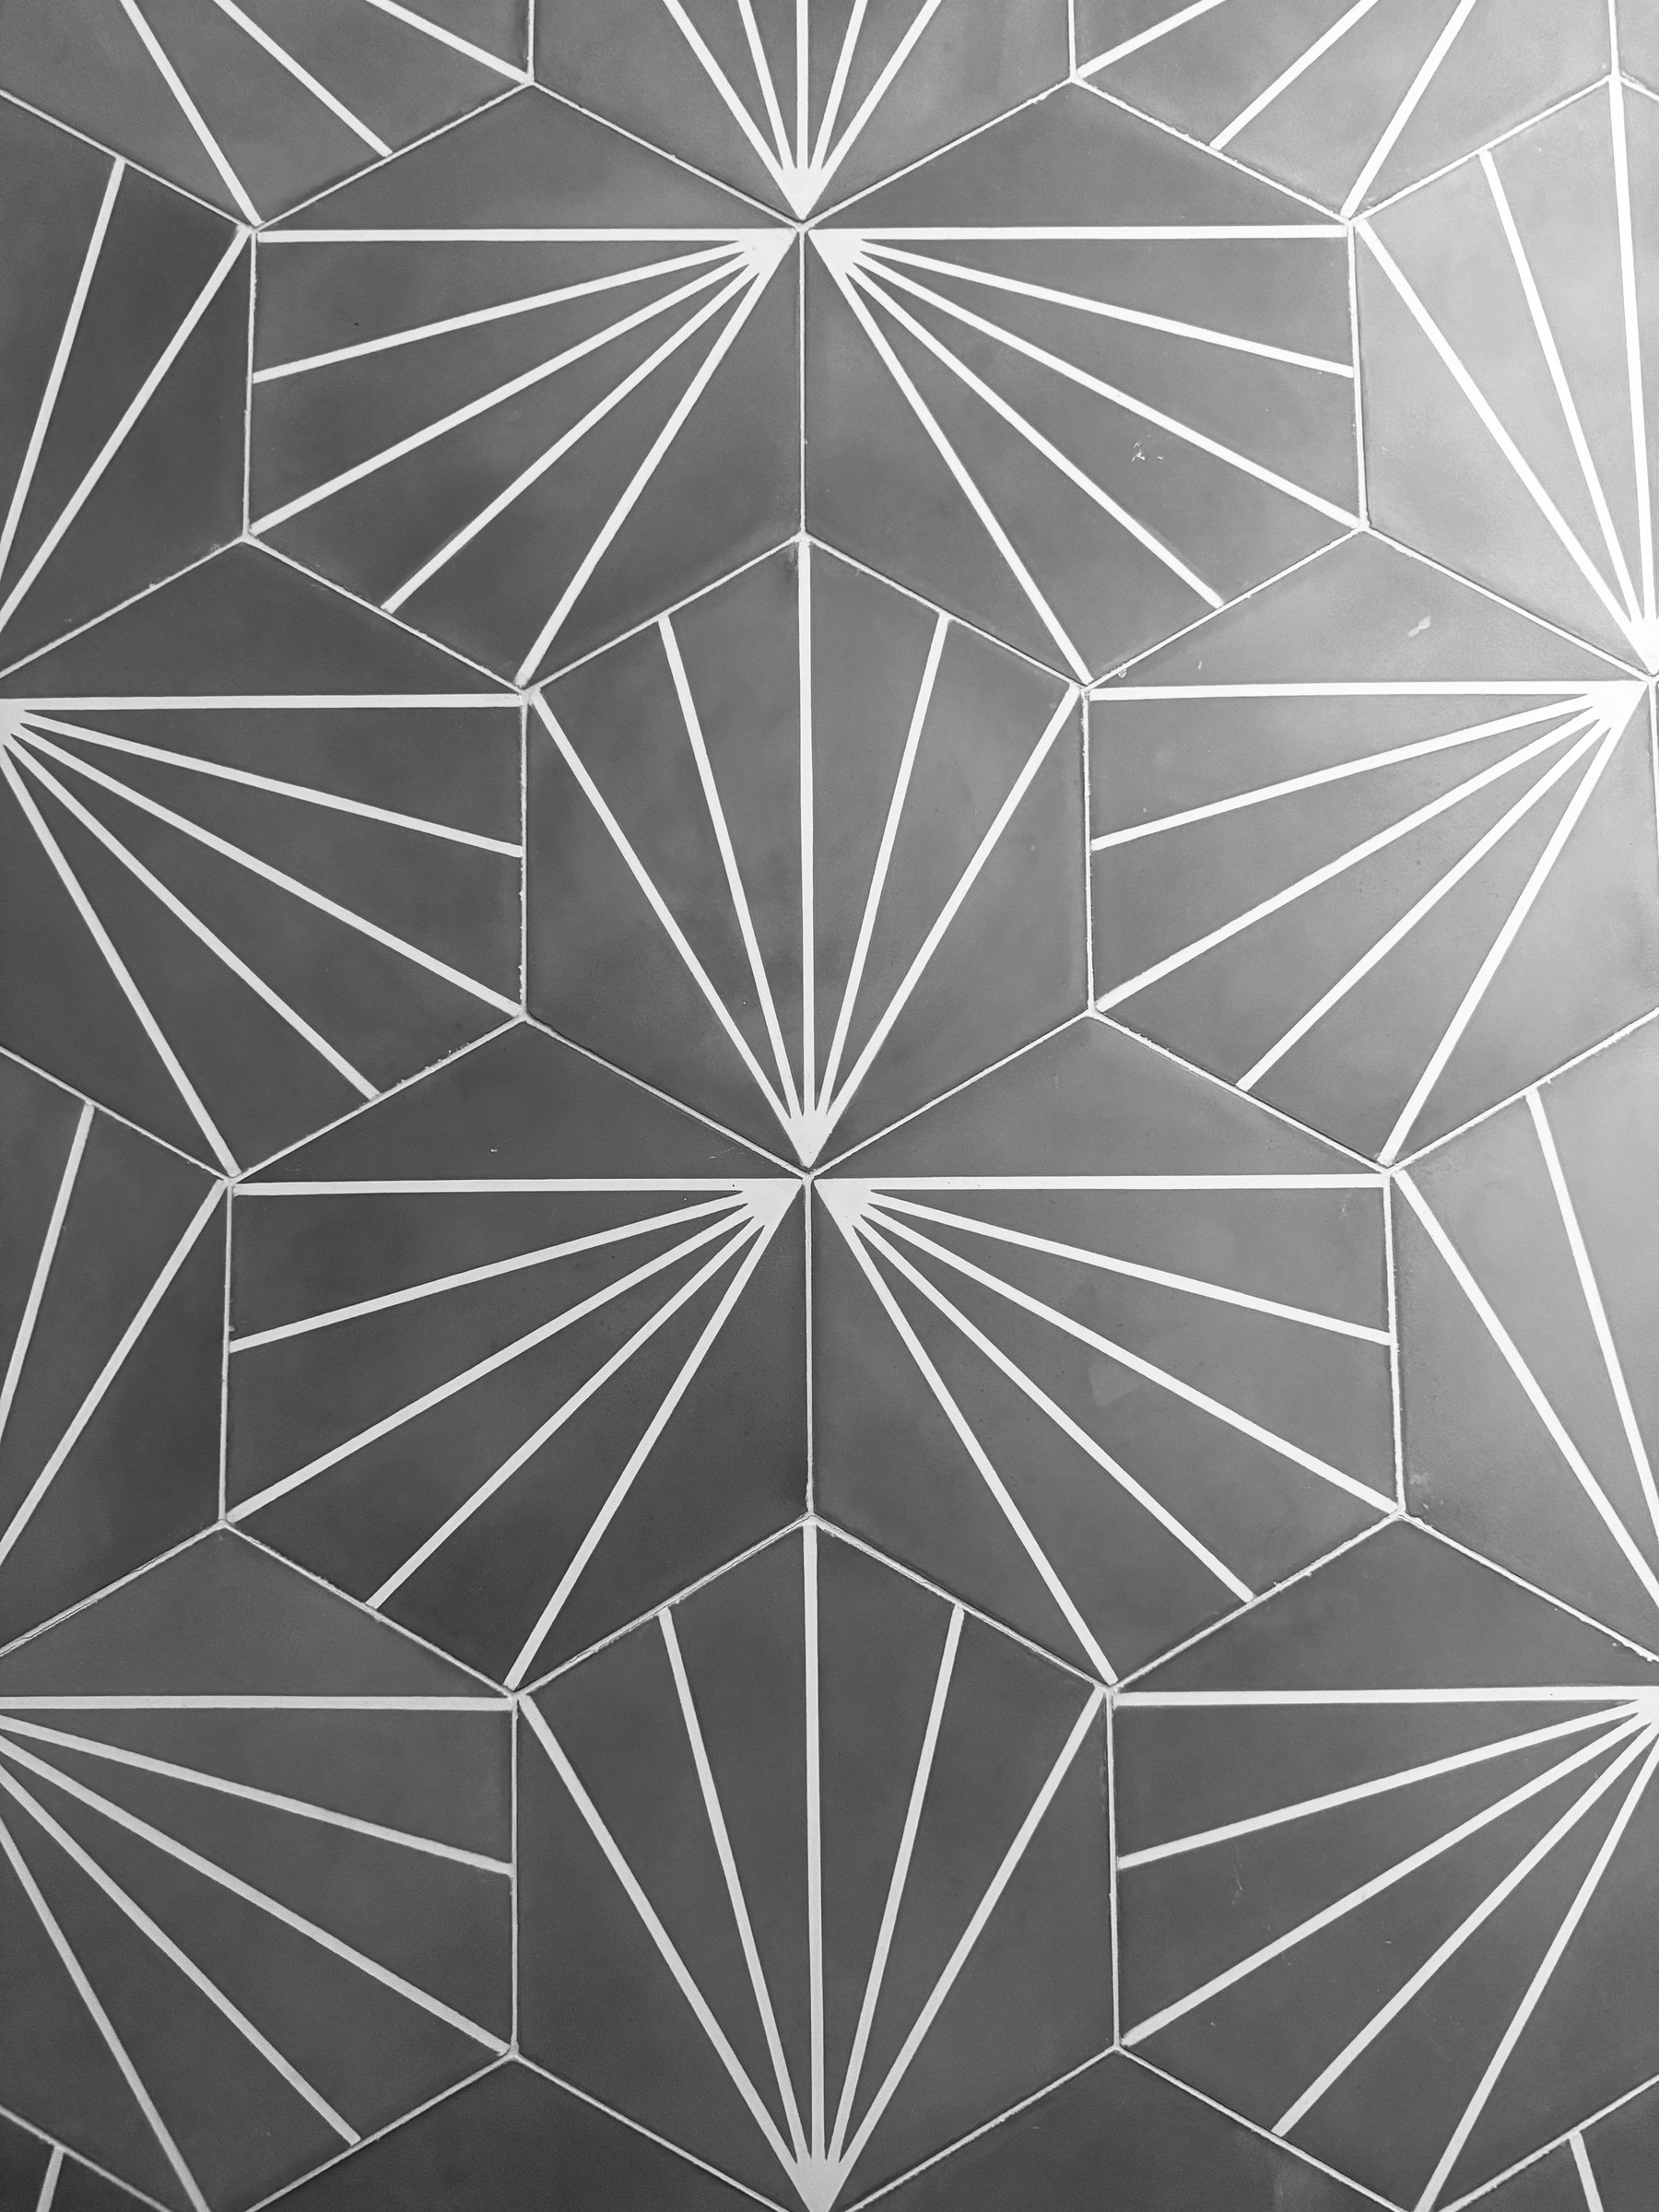 Grey hexagonal tiles with a pattern of white lines on them.